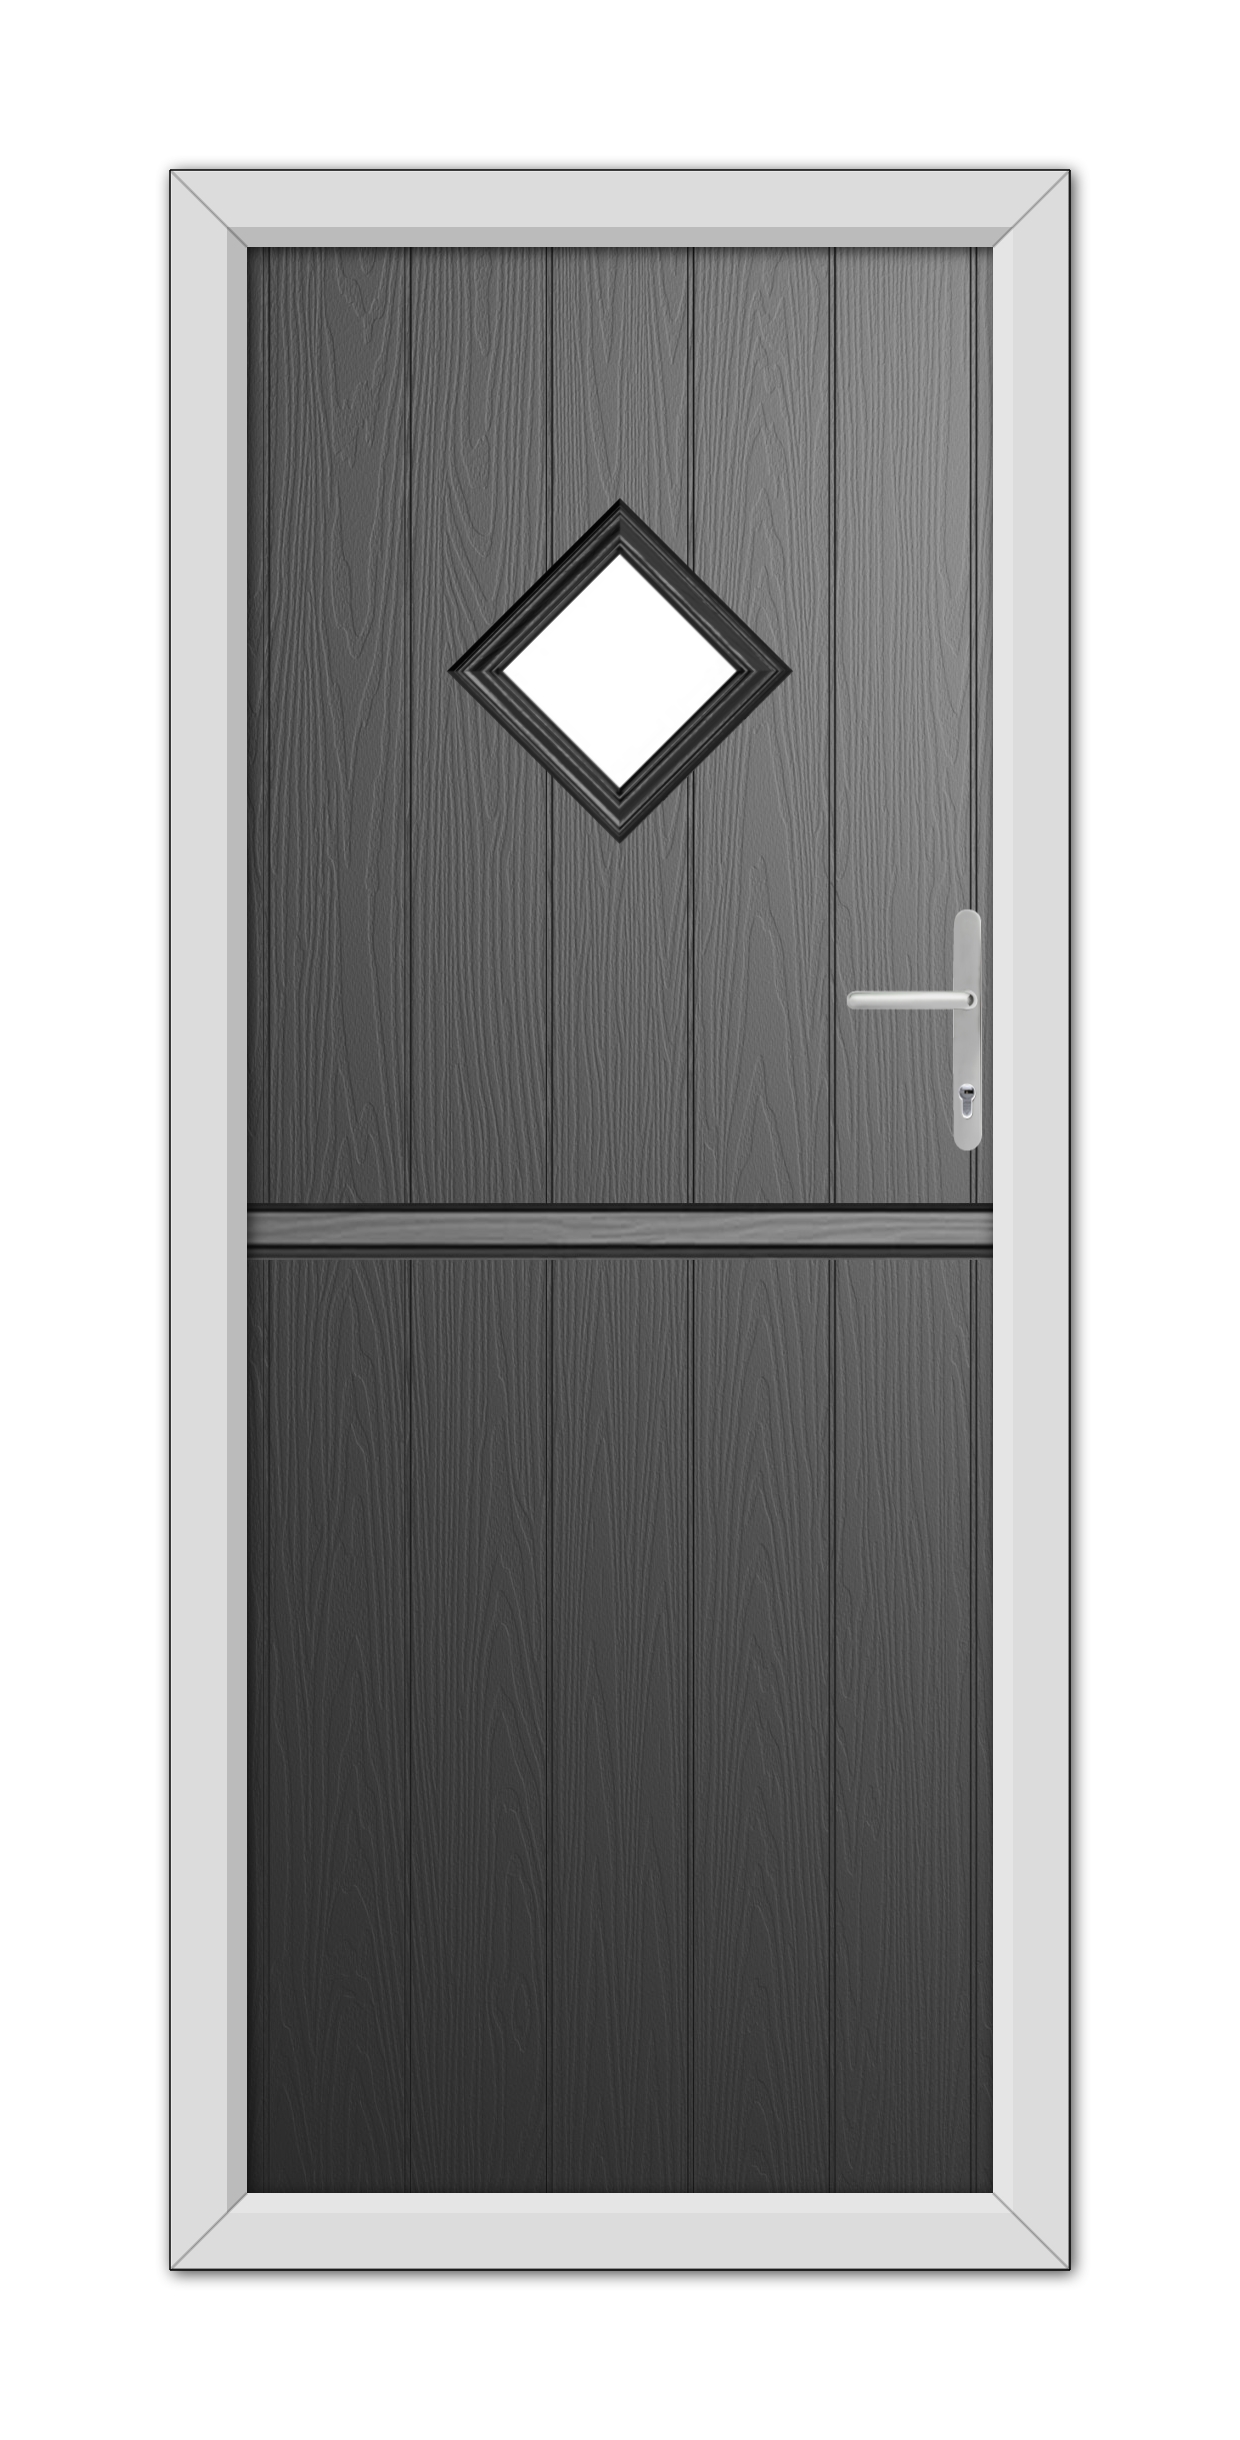 A modern Black Cornwall Stable Composite Door 48mm Timber Core with a diamond-shaped window, fitted in a white frame and equipped with a metal handle.